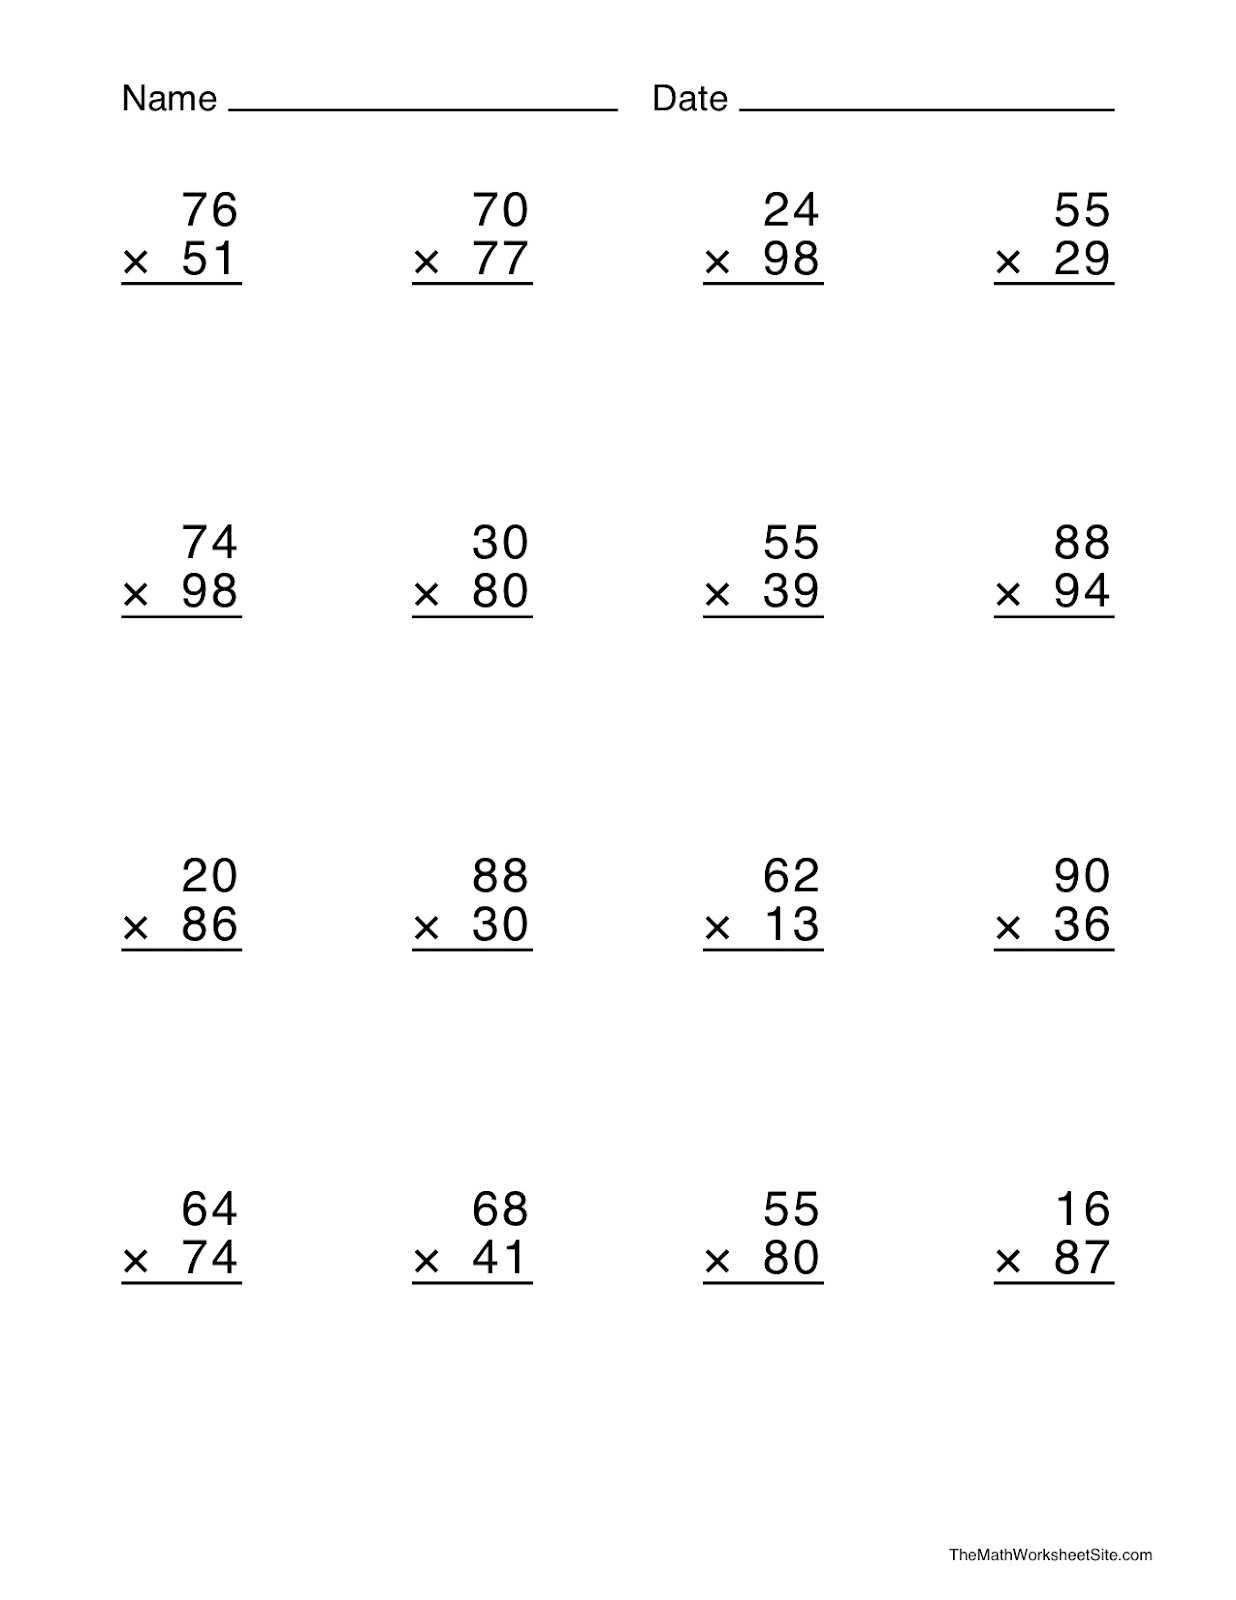 calculator-practice-worksheets-3rd-grade-order-of-operations